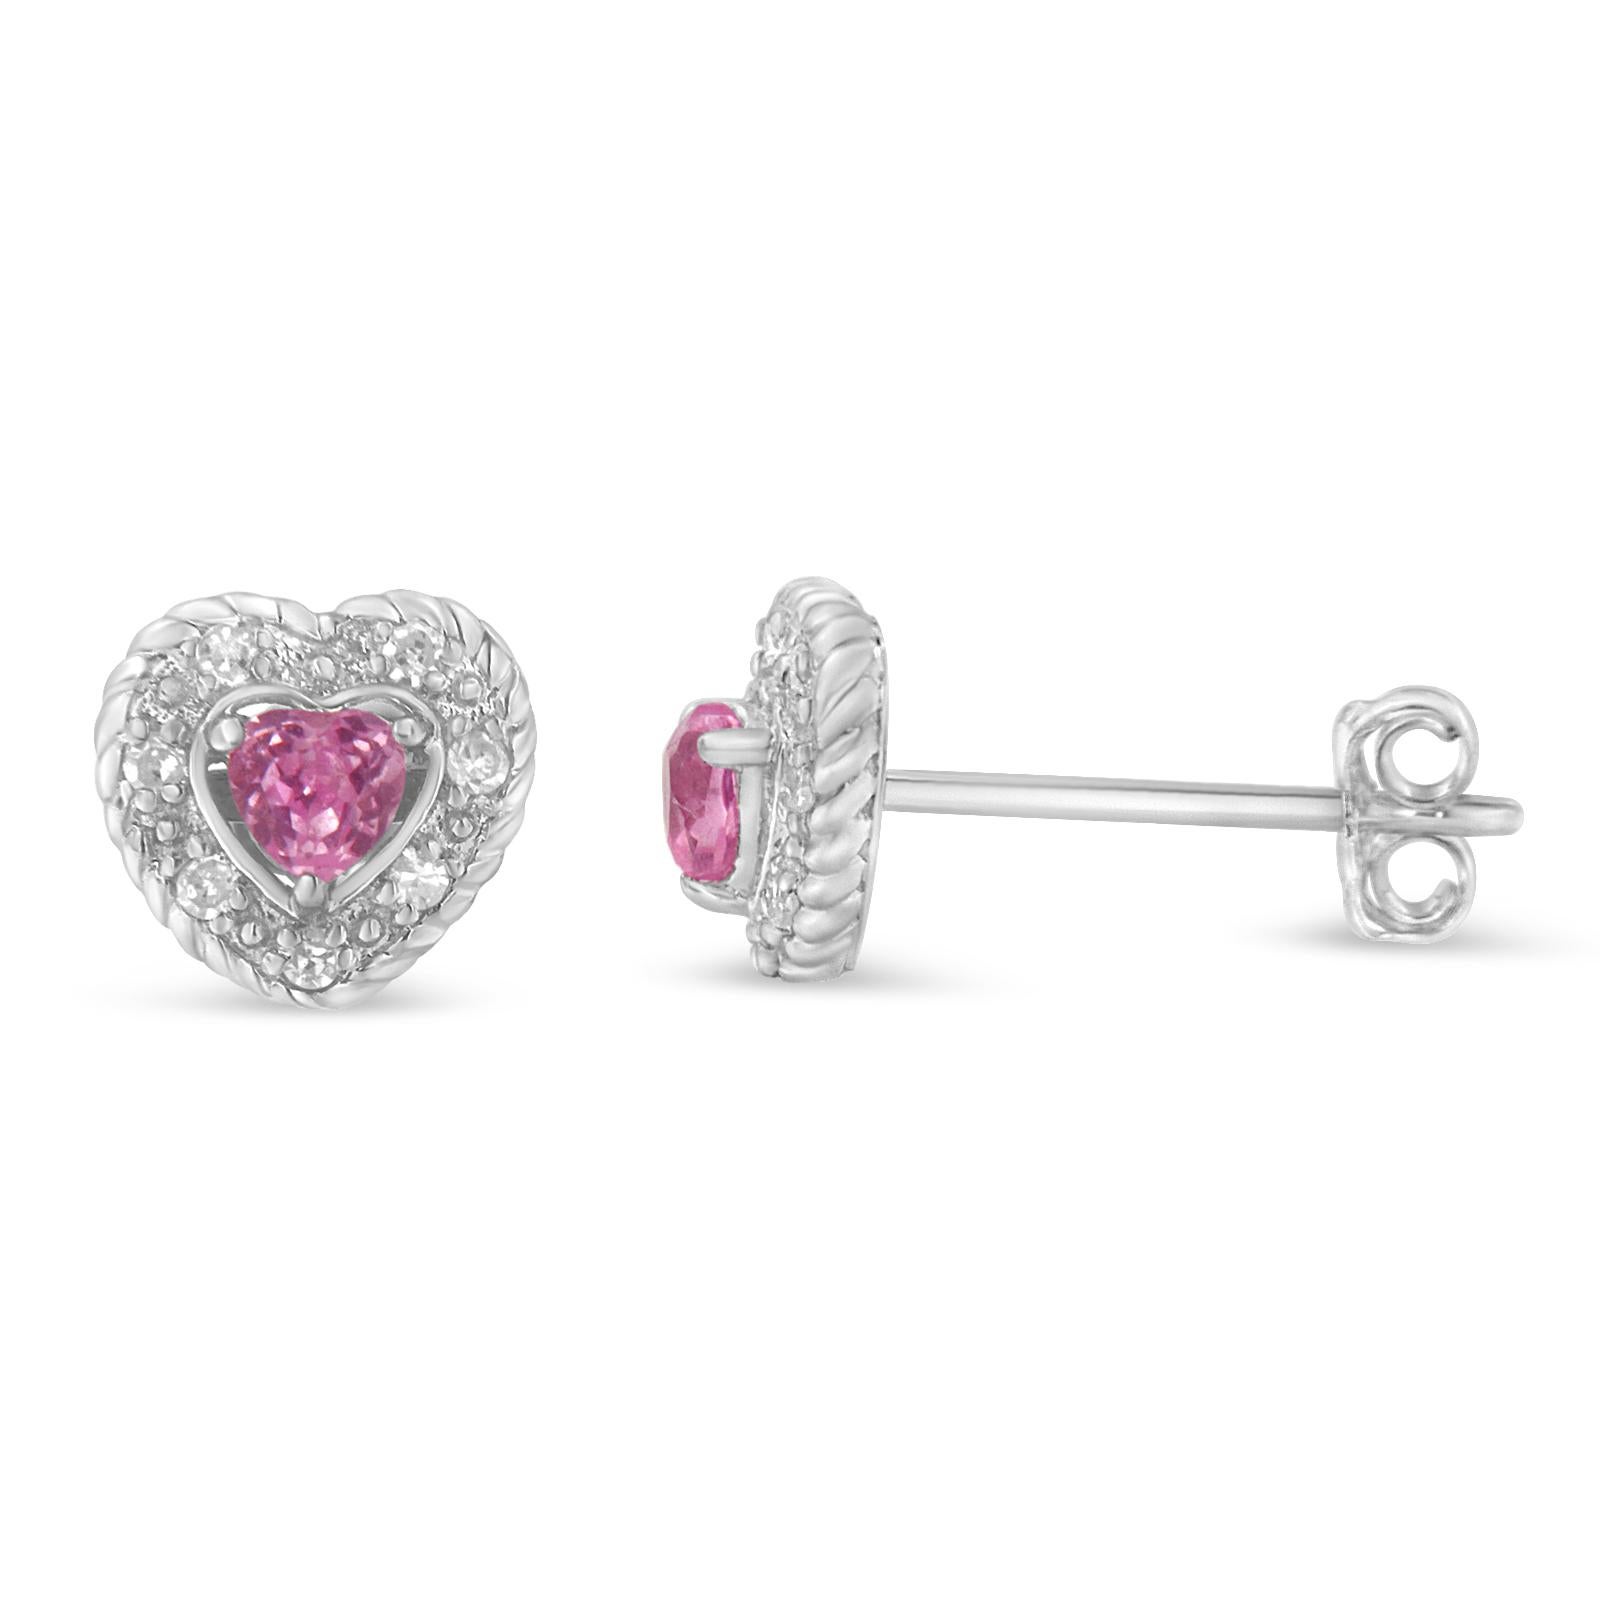 Bound to turn heads, this luminous pair of stud earrings is graced with rich sterling silver. Dazzling in pink sapphire, the heart-shaped earrings captivate the grand mystique. Surrounded by the halo of glittering diamonds, the earrings amalgamate